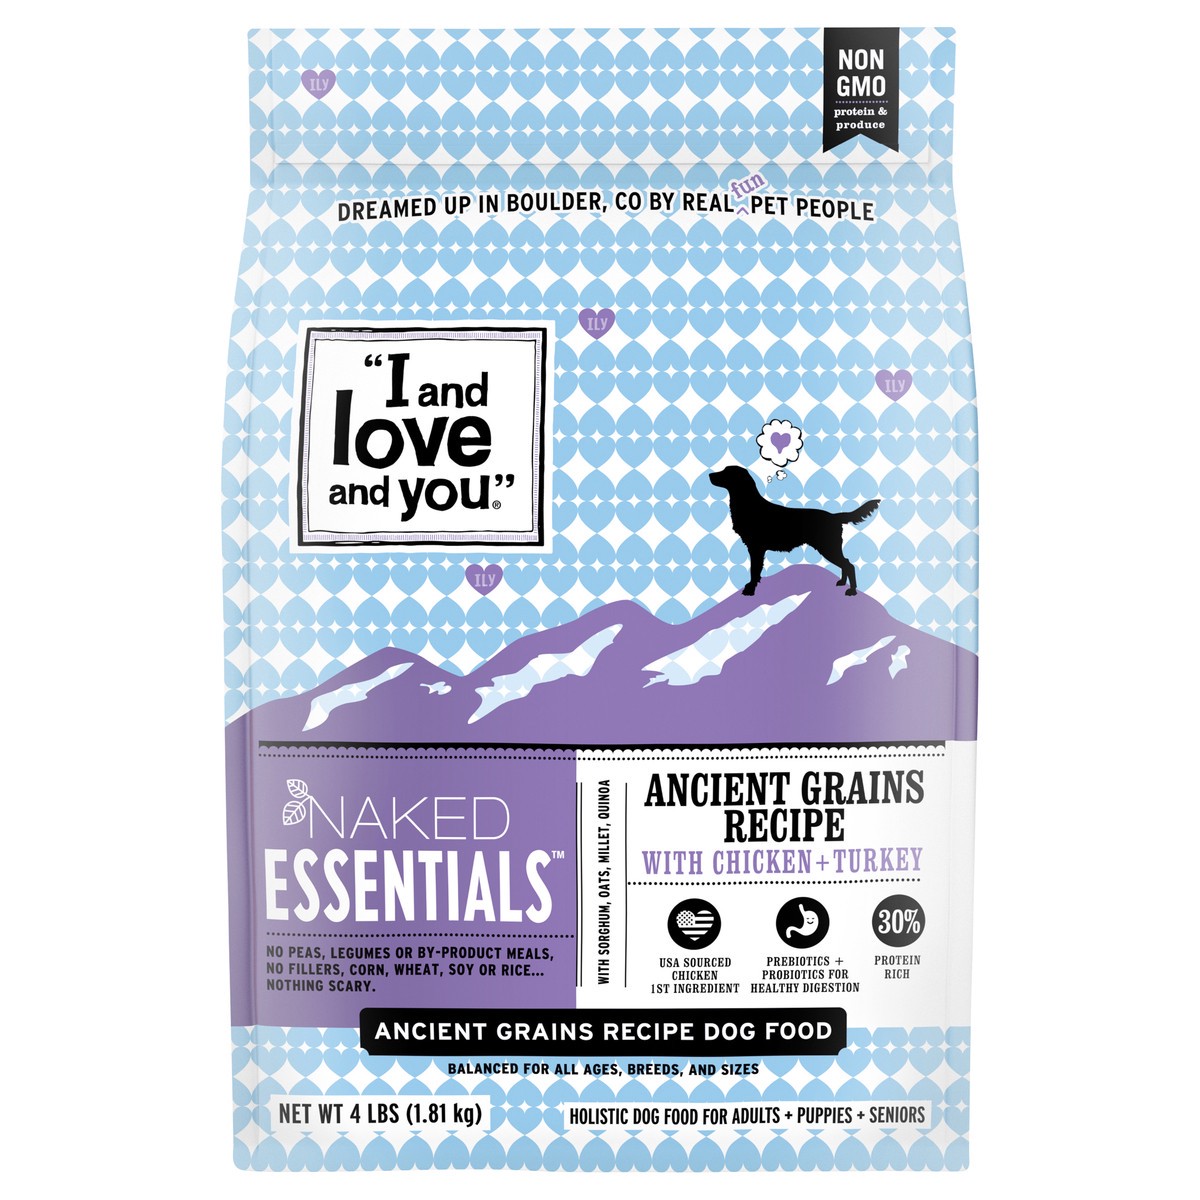 slide 9 of 10, I and Love and You "I and love and you" Naked Essentials Ancient Grains Dry Dog Food, Chicken and Turkey Recipe, Prebiotics and Probiotics, Real Meat, No Fillers, 4lb Bag, 4 lb